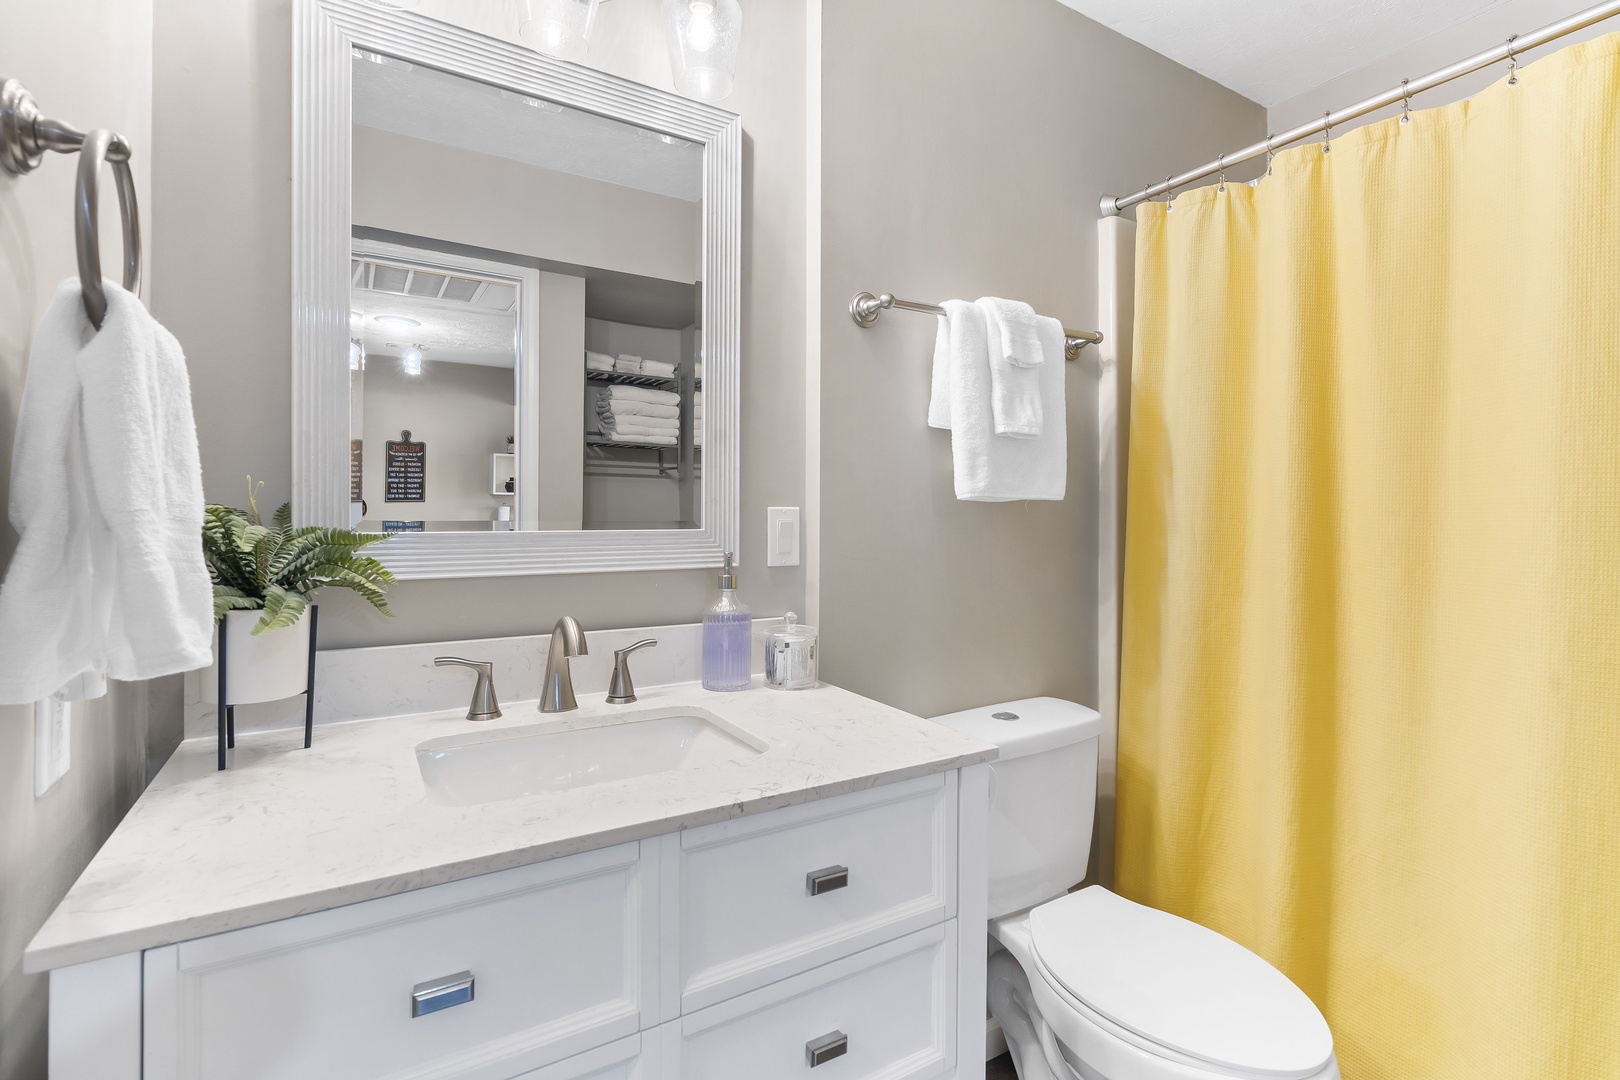 A chic single vanity & shower/tub combo await in the ensuite bathroom